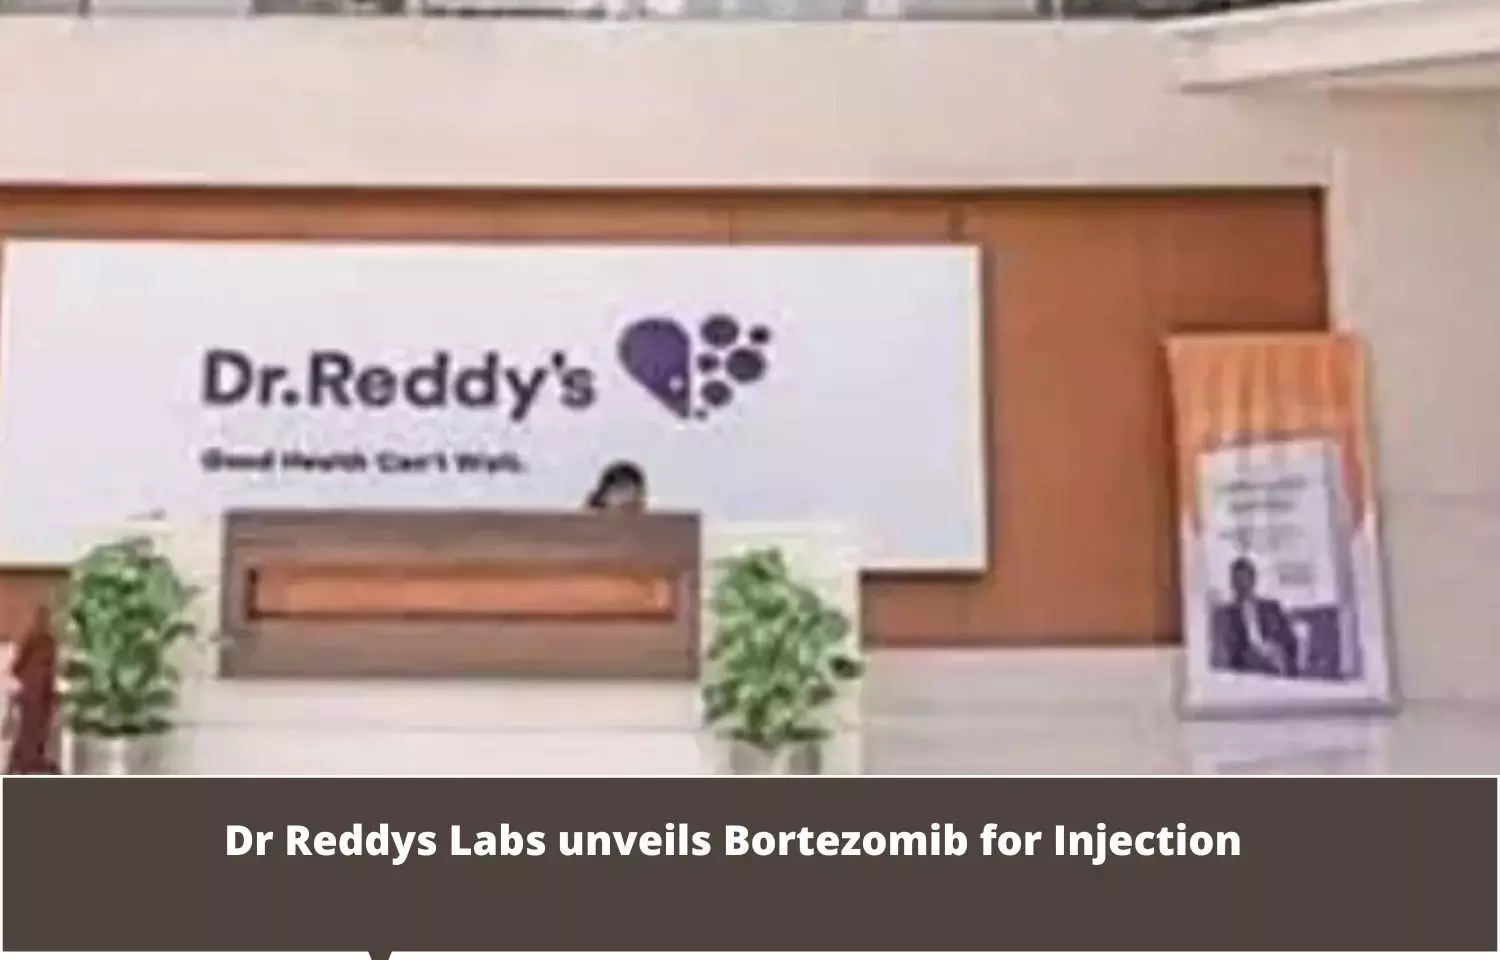 Dr Reddys launches Bortezomib for Injection in US